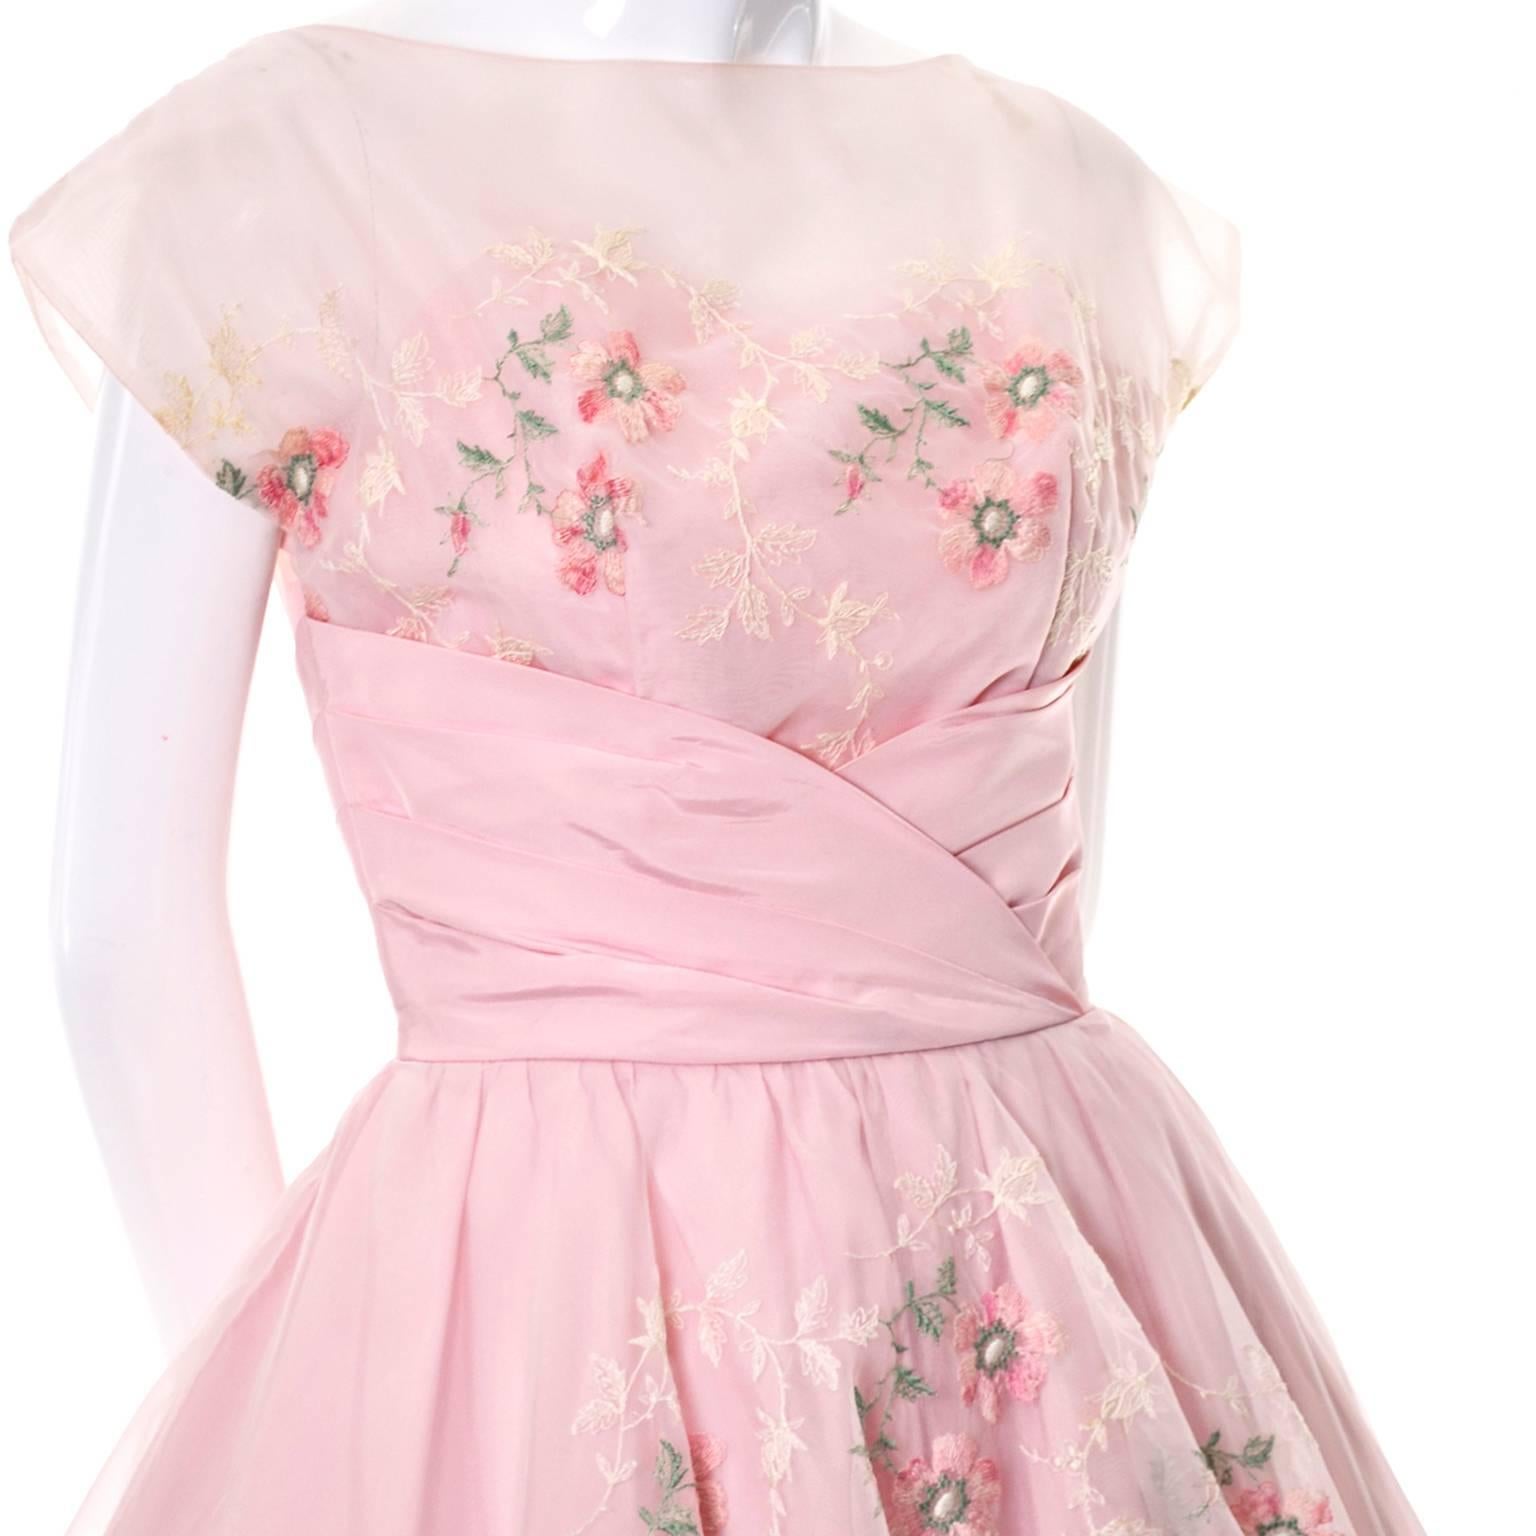 Beige Pink 1950s Vintage Dress Fairytale Dreamy Floral Embroidery Full Skirt 4/6